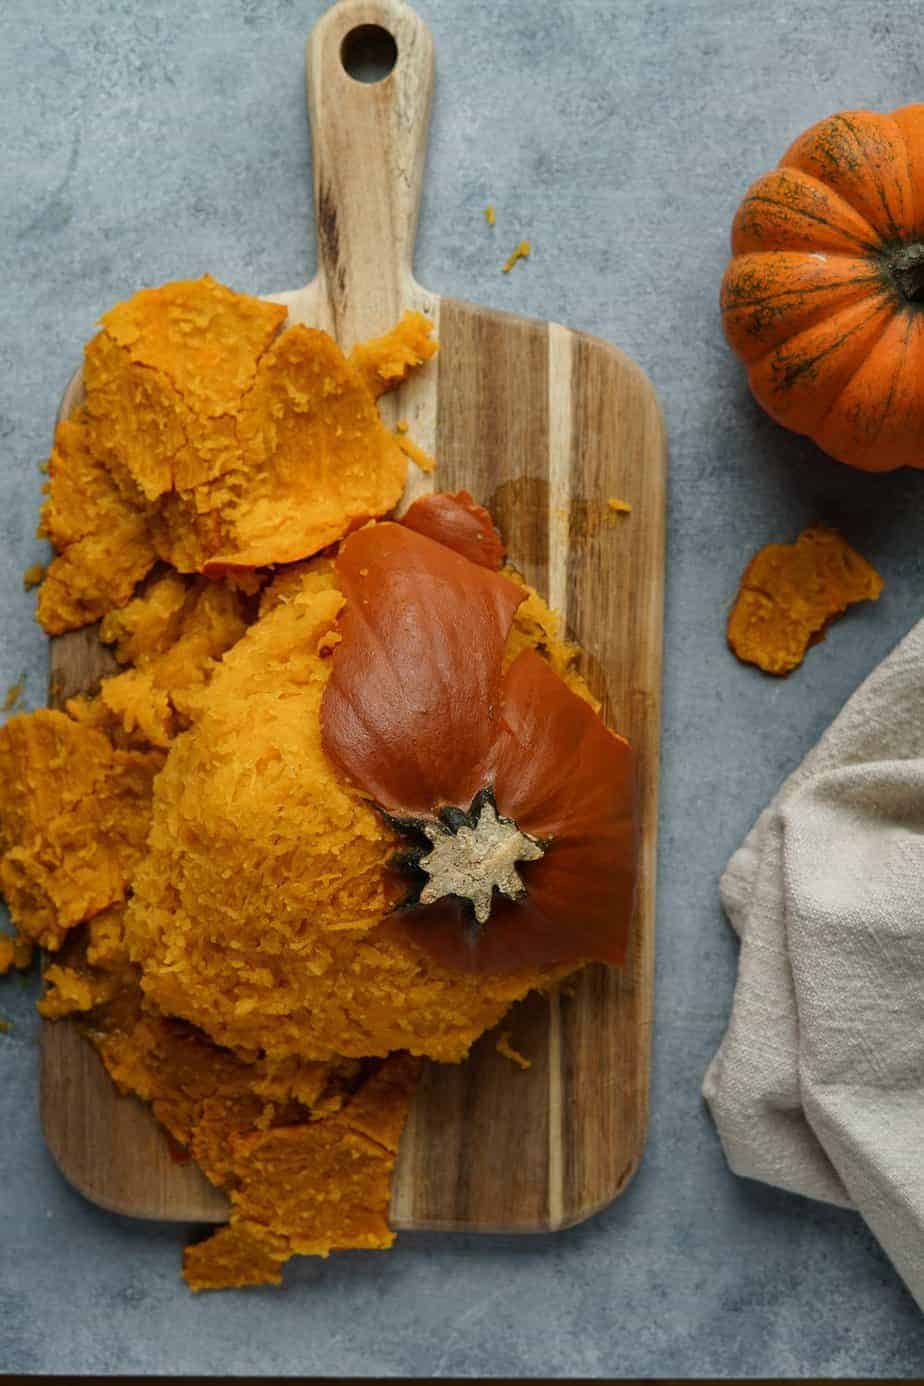 Remove the trivet and start peeling the pumpkin skin off on a cutting board.